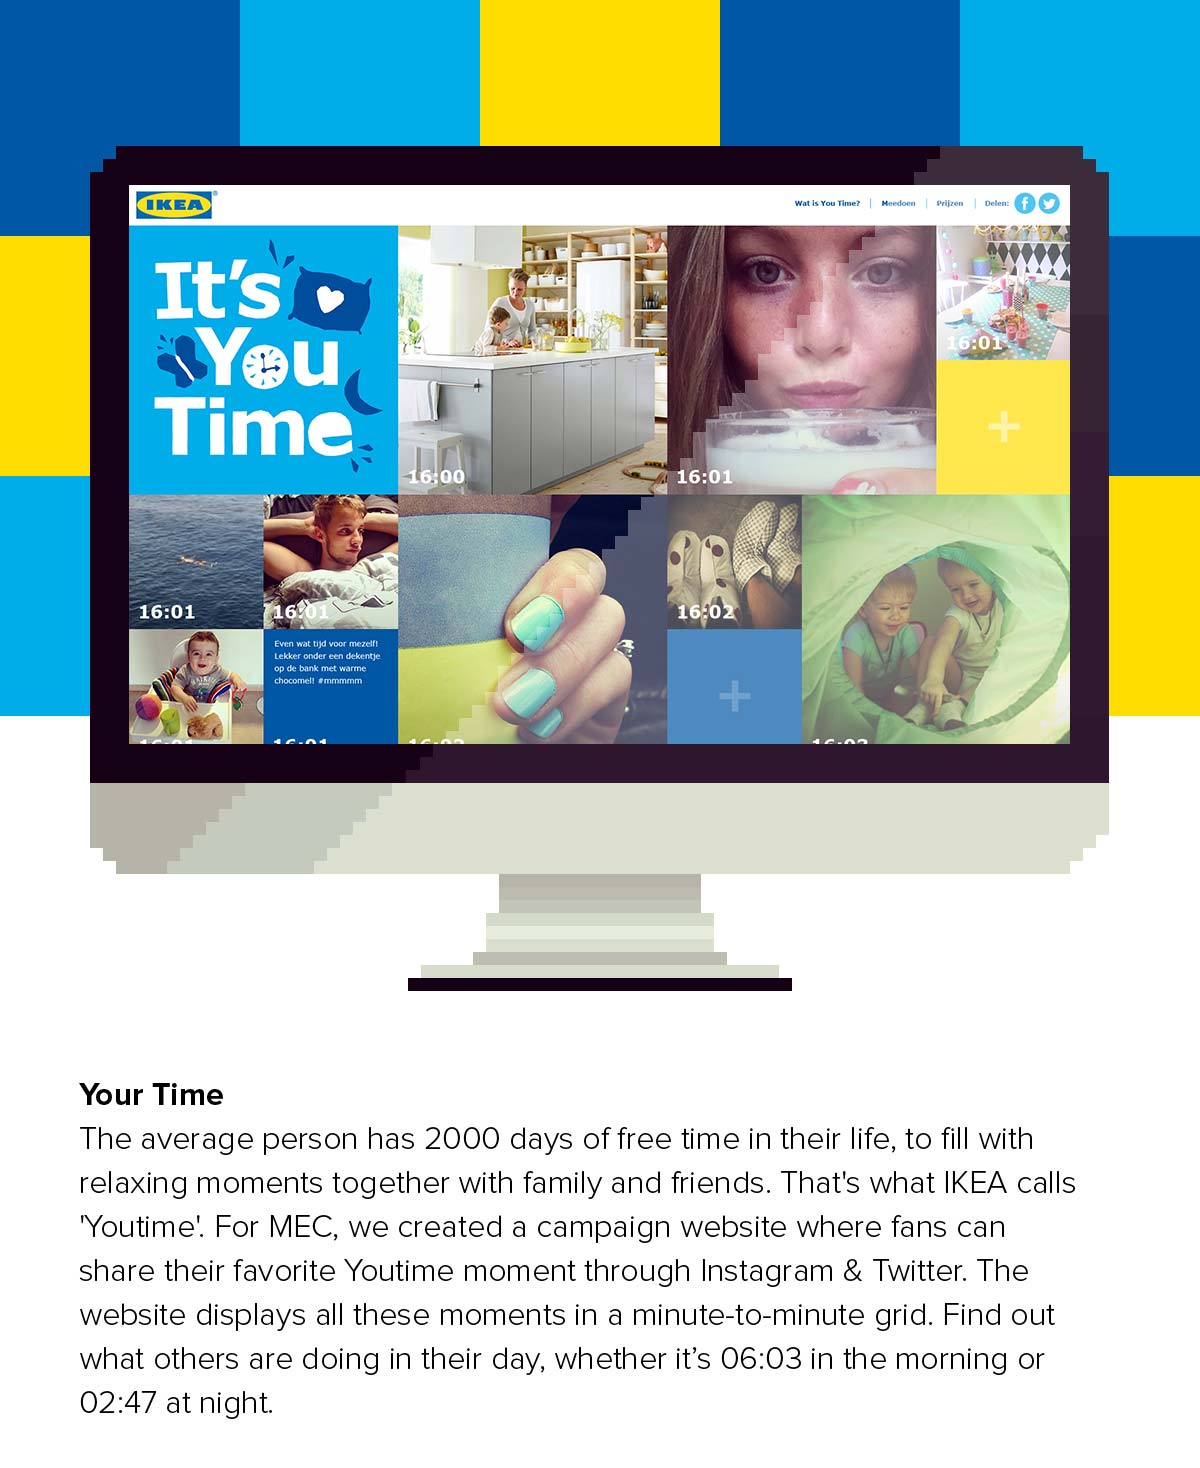 The average person has 2000 days of free time in their life, to fill with relaxing moments together with family and friends. That's what IKEA calls 'Youtime'. For MEC, we created a campaign website where fans can share their favorite Youtime moment through Instagram & Twitter. The website displays all these moments in a minute-to-minute grid. Find out what others are doing in their day, whether it.s 06:03 in the morning or 02:47 at night.